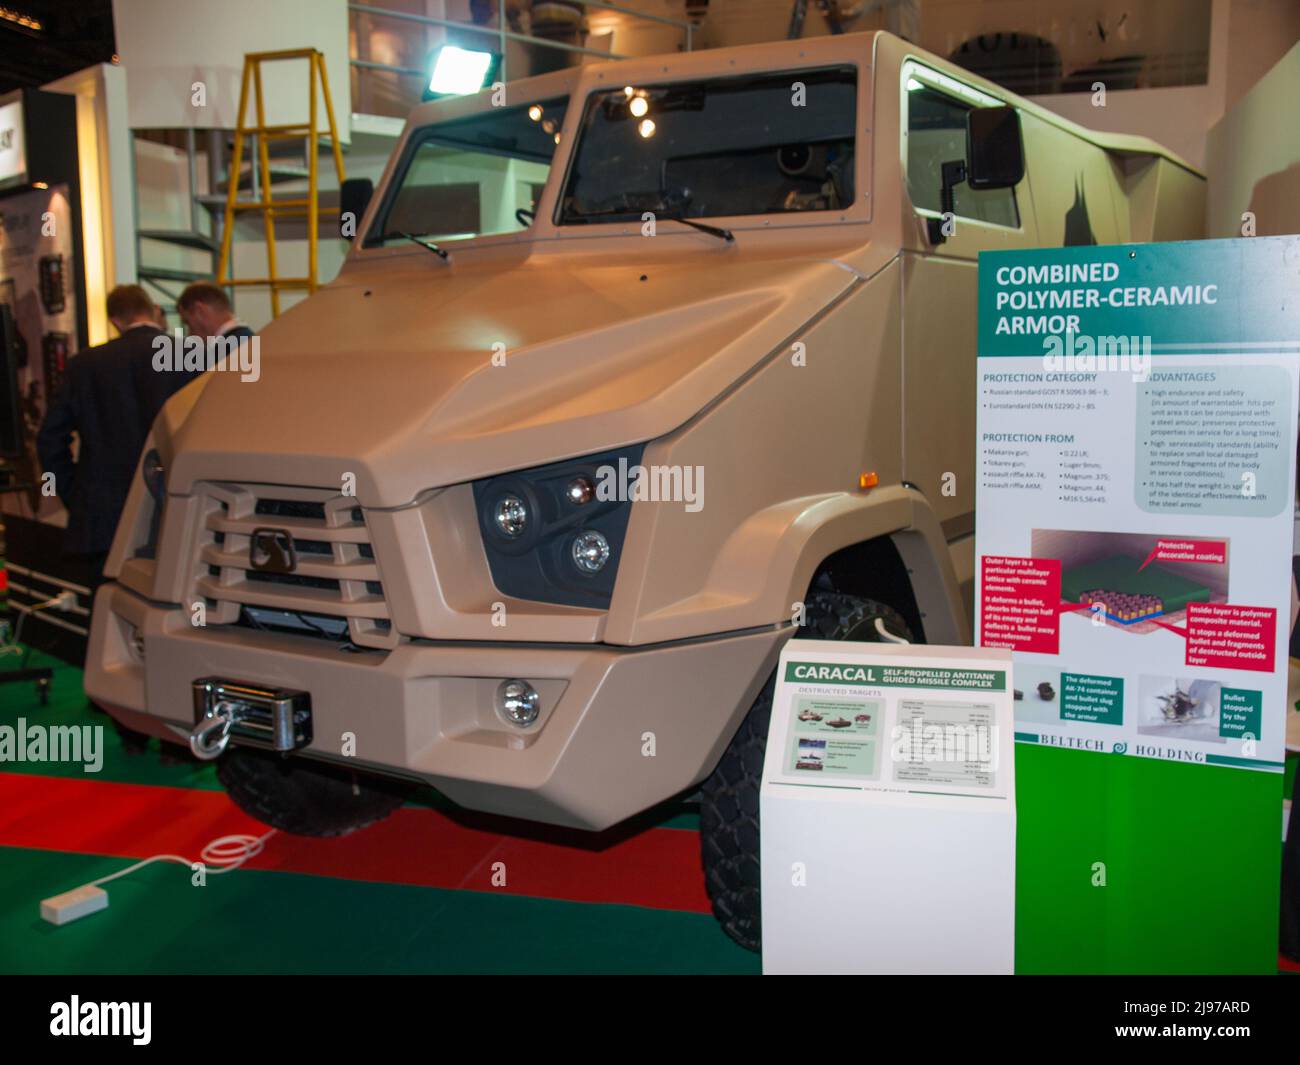 Abu Dhabi, UAE - Feb.23. 2011: Belarus Beltech holding CARACAL self-propelled guided missile complex at IDEX 2011 Stock Photo